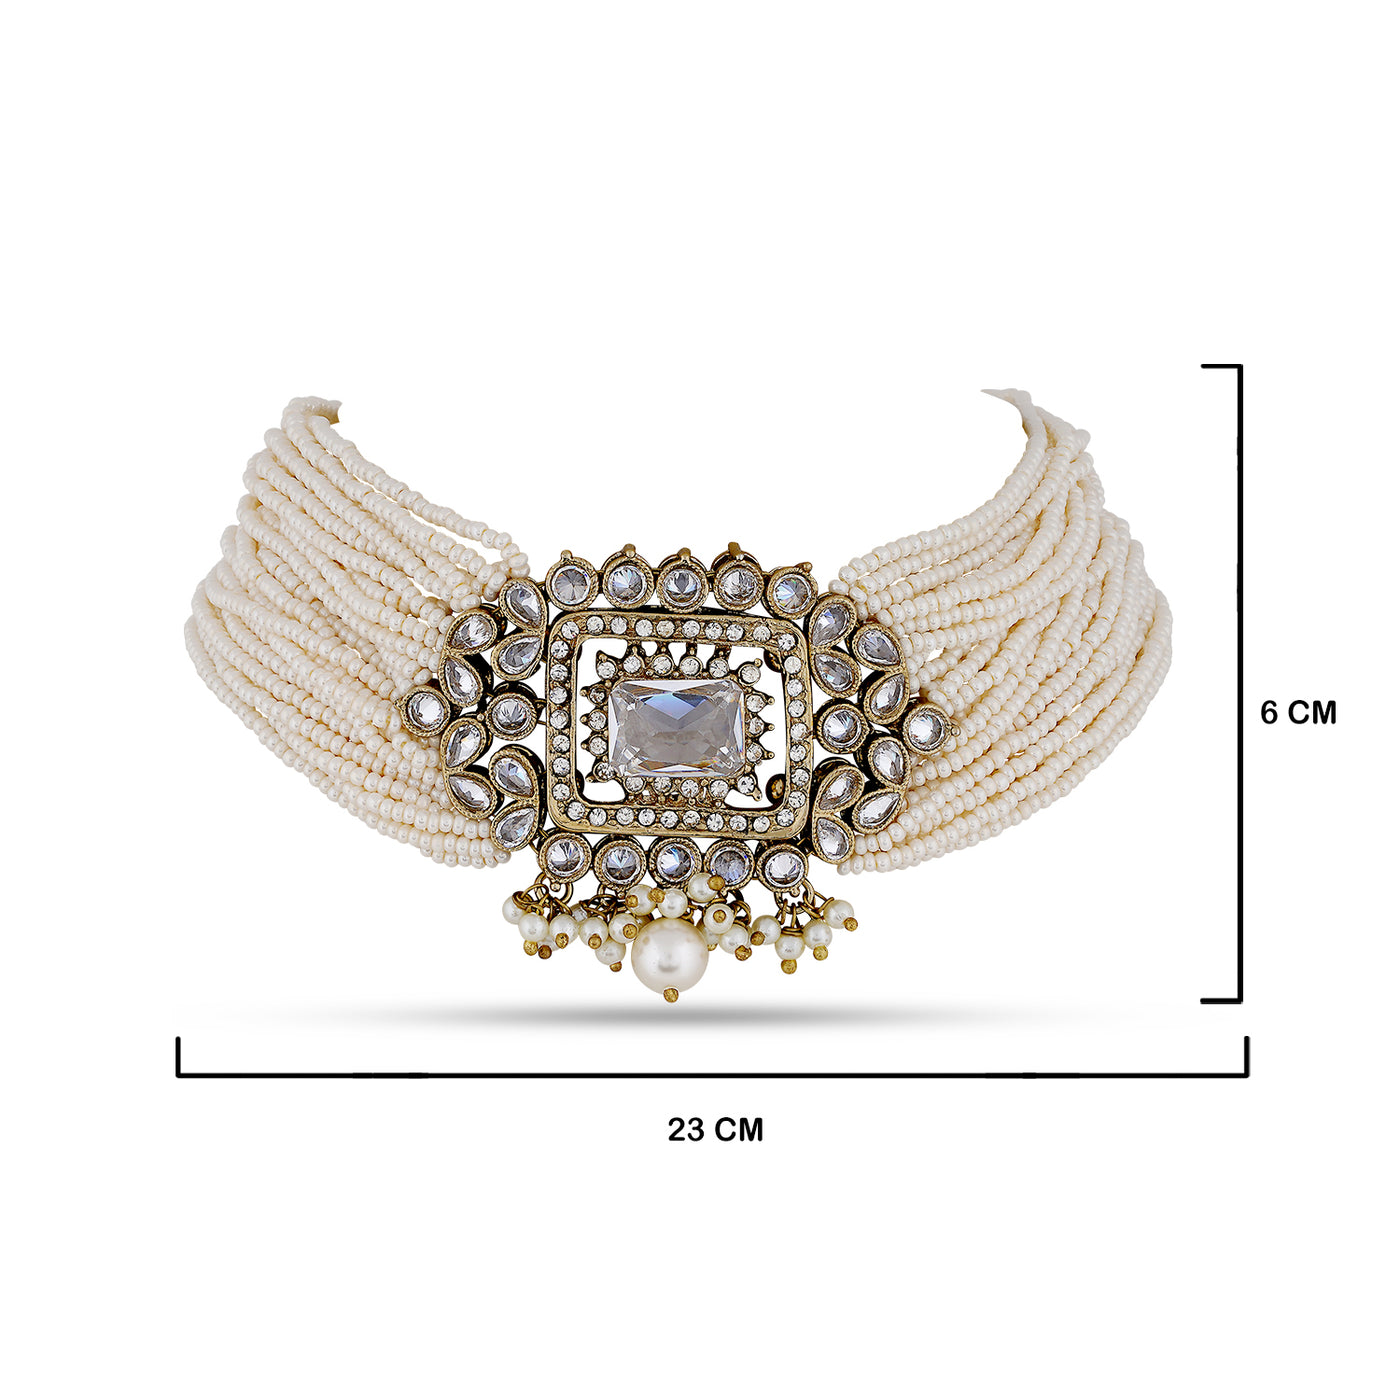  White Stoned Kundan Choker with measurements in cm. 23cm by 6cm.